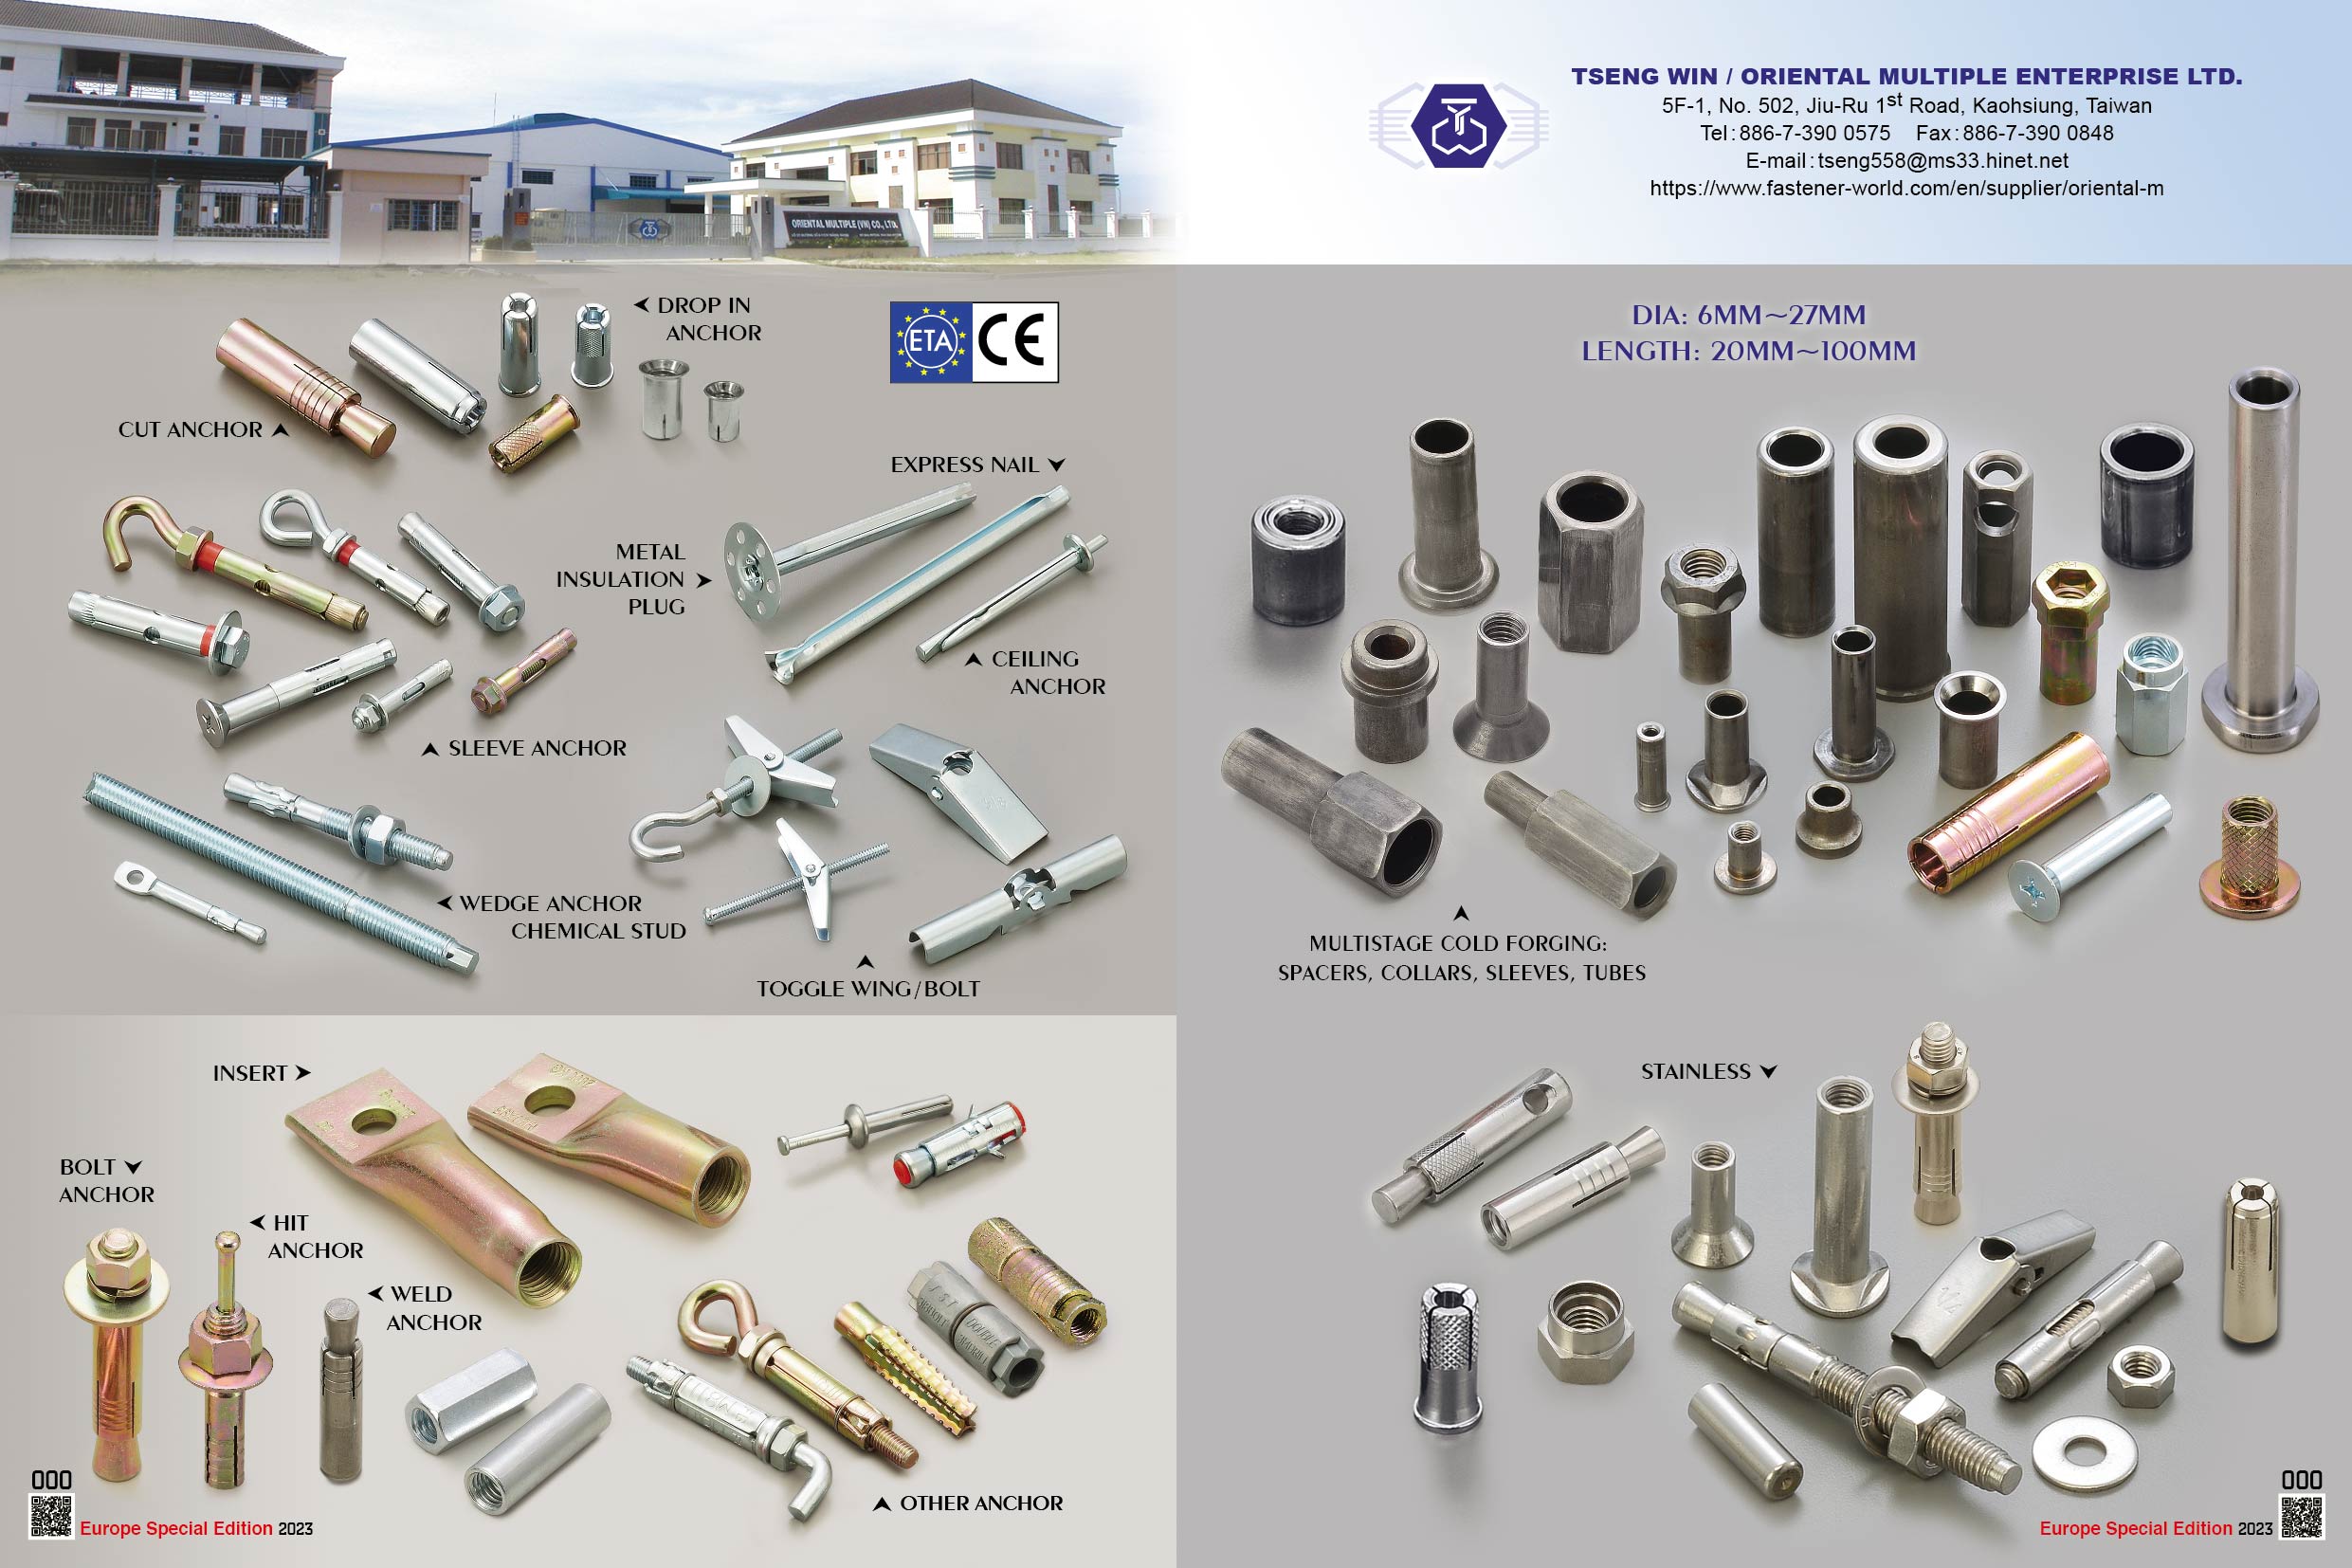 TSENG WIN , Cut Anchor, Drop in Anchor, Metal Insulation Plug, Express Nail, Ceiling Anchor, Sleeve Anchor, Wedge Anchor Chemical Stud, Toggle Wing/Bolt, Insert, Bolt Anchor, Hit Anchor, Weld Anchor, Stainless Steel, Multistage cold Forging, Spacers, Collars, Sleeves, Tubes , Cut Anchors